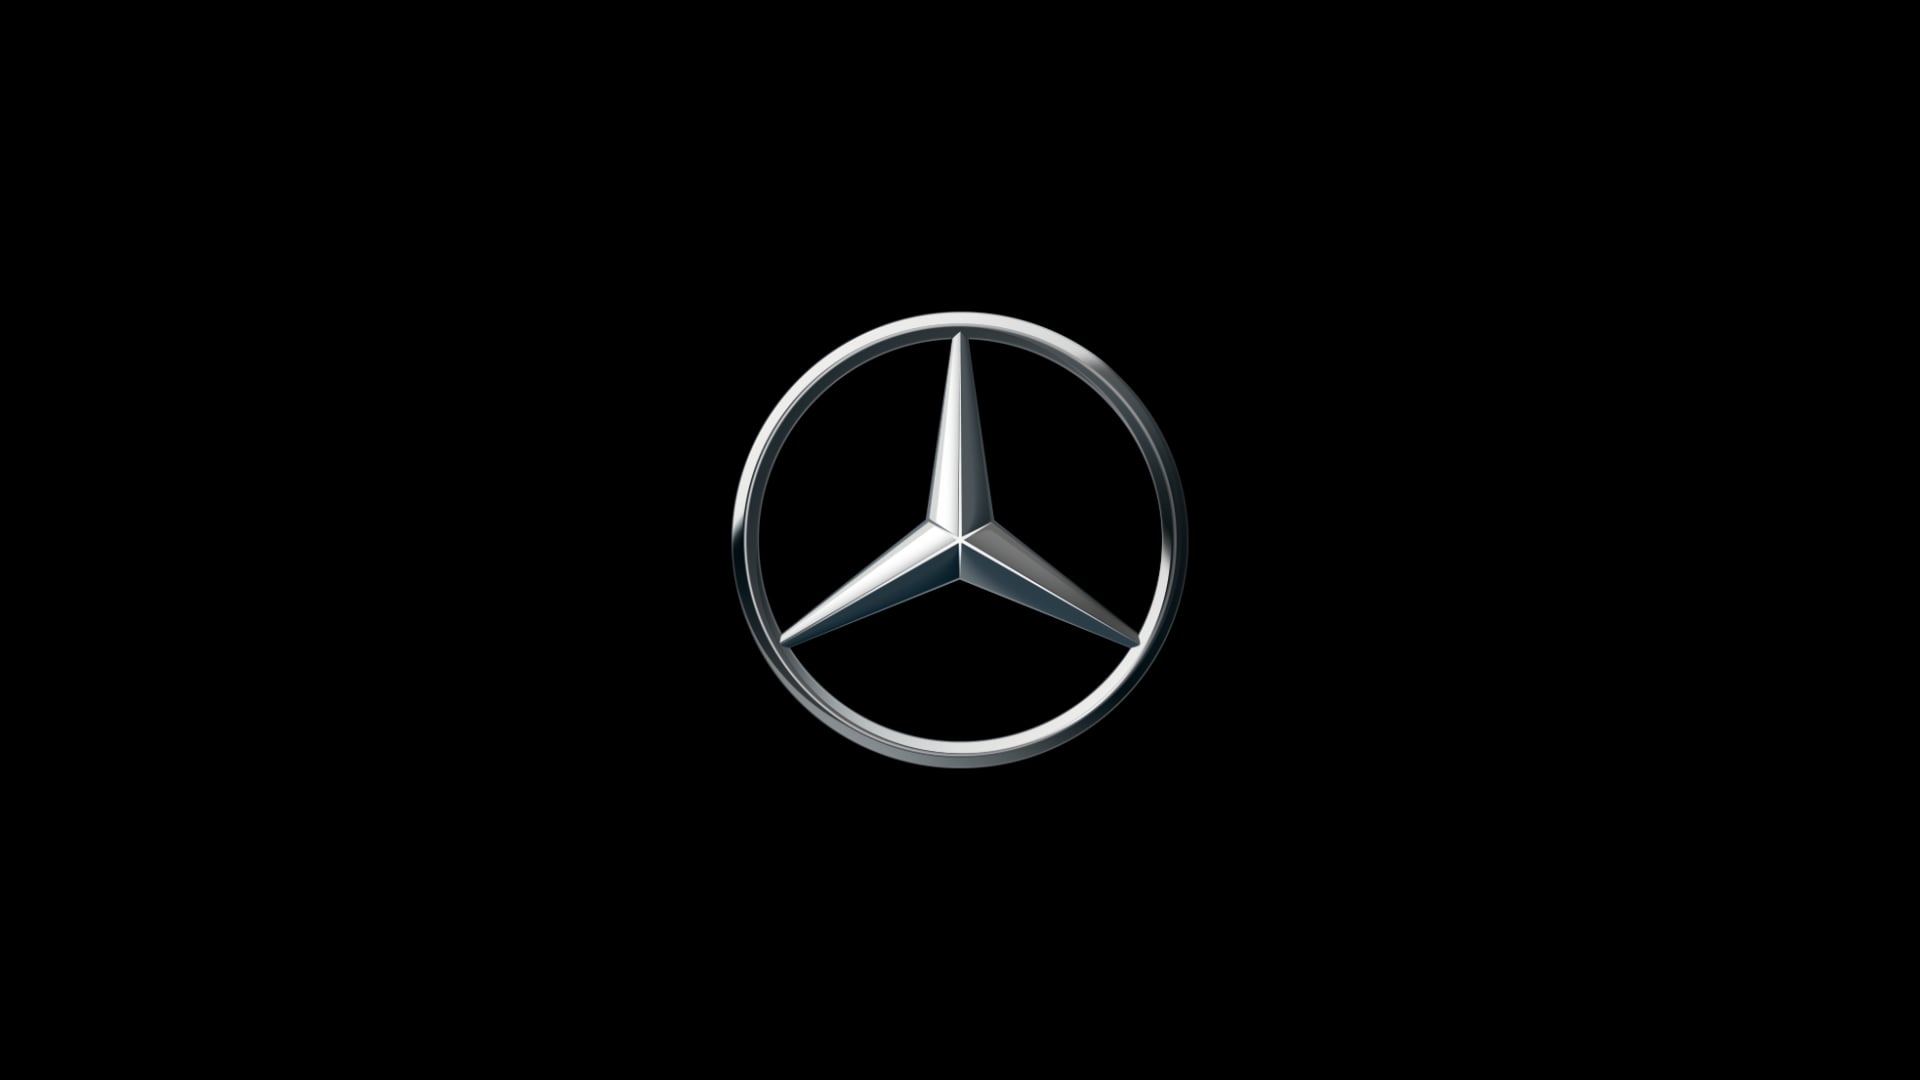 Merceds Benz - Those who give it all | Mobility